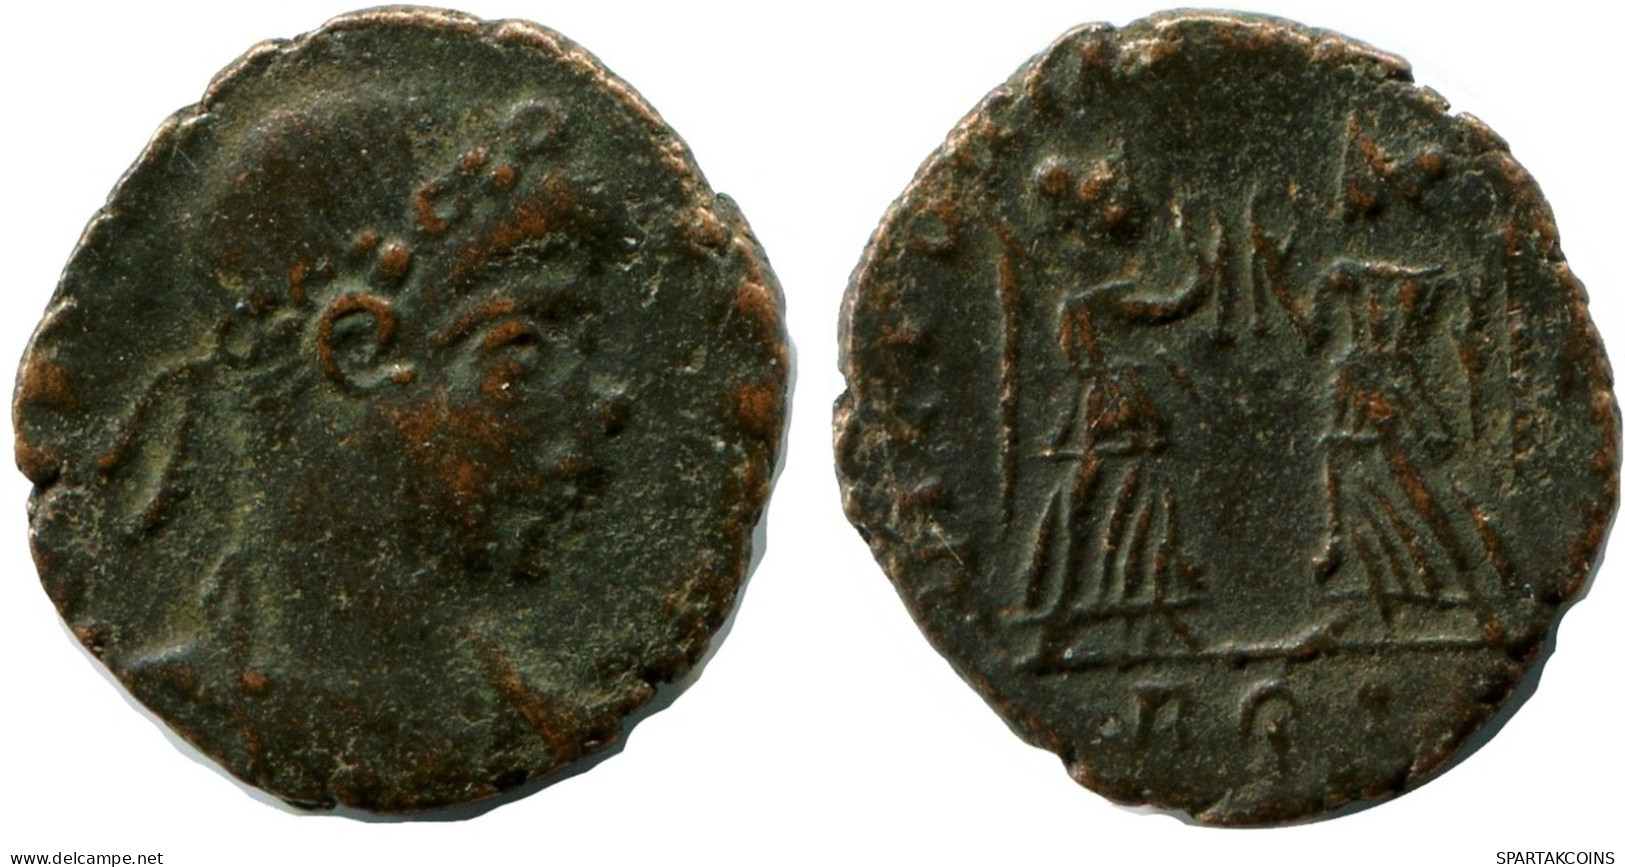 CONSTANS MINTED IN ROME ITALY FOUND IN IHNASYAH HOARD EGYPT #ANC11515.14.U.A - El Impero Christiano (307 / 363)